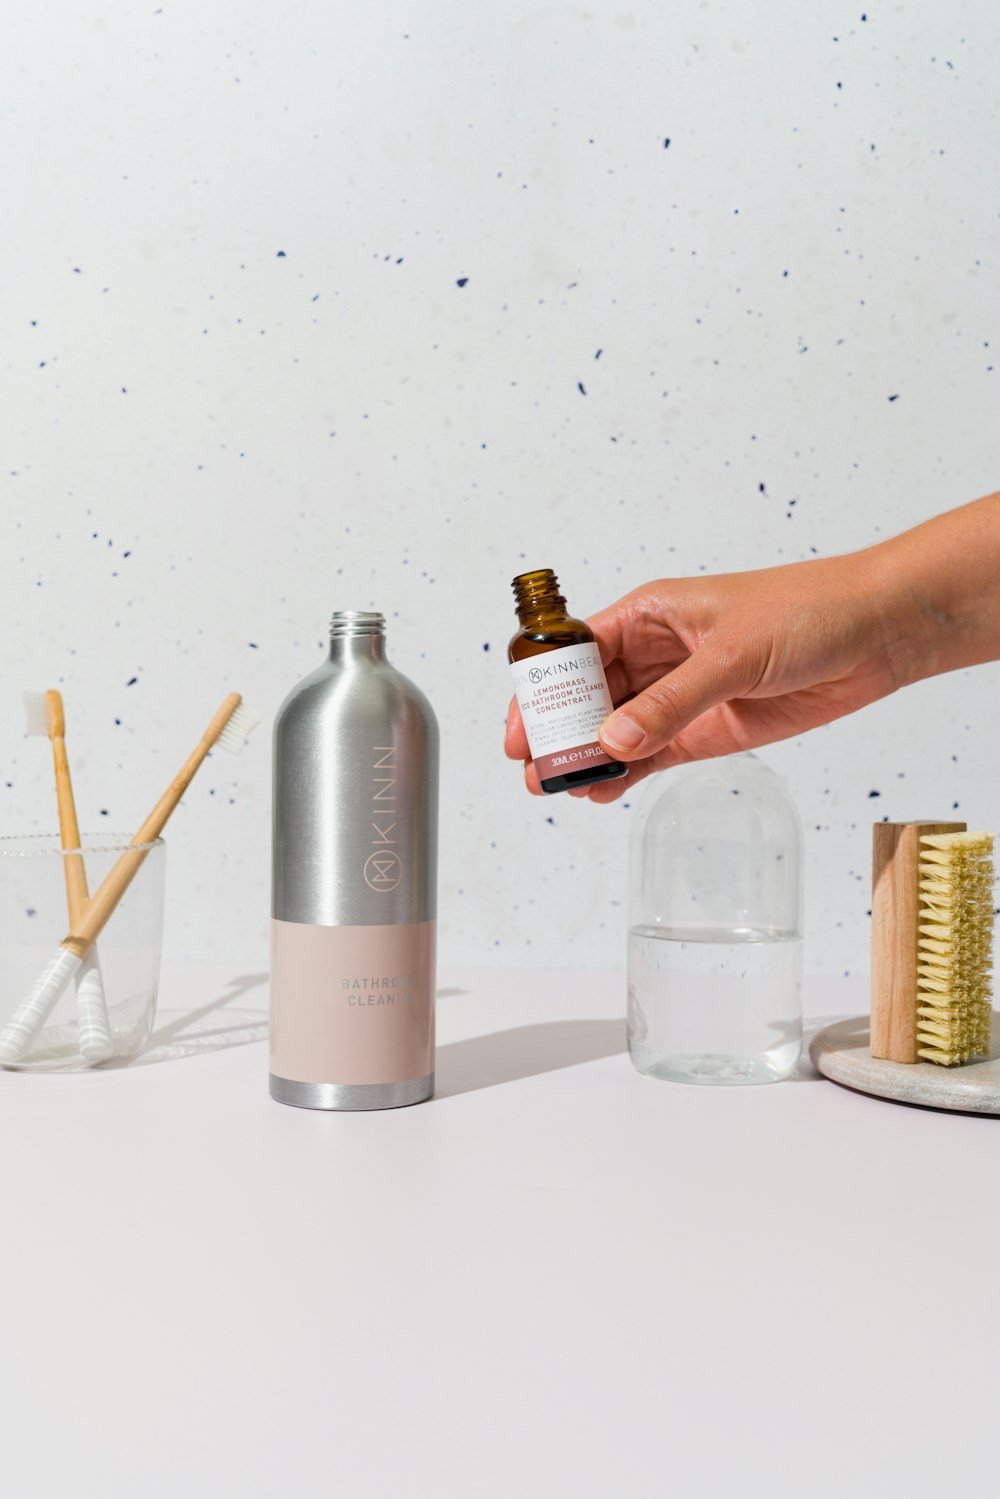 a person holding a bottle of essential oil next to a brush